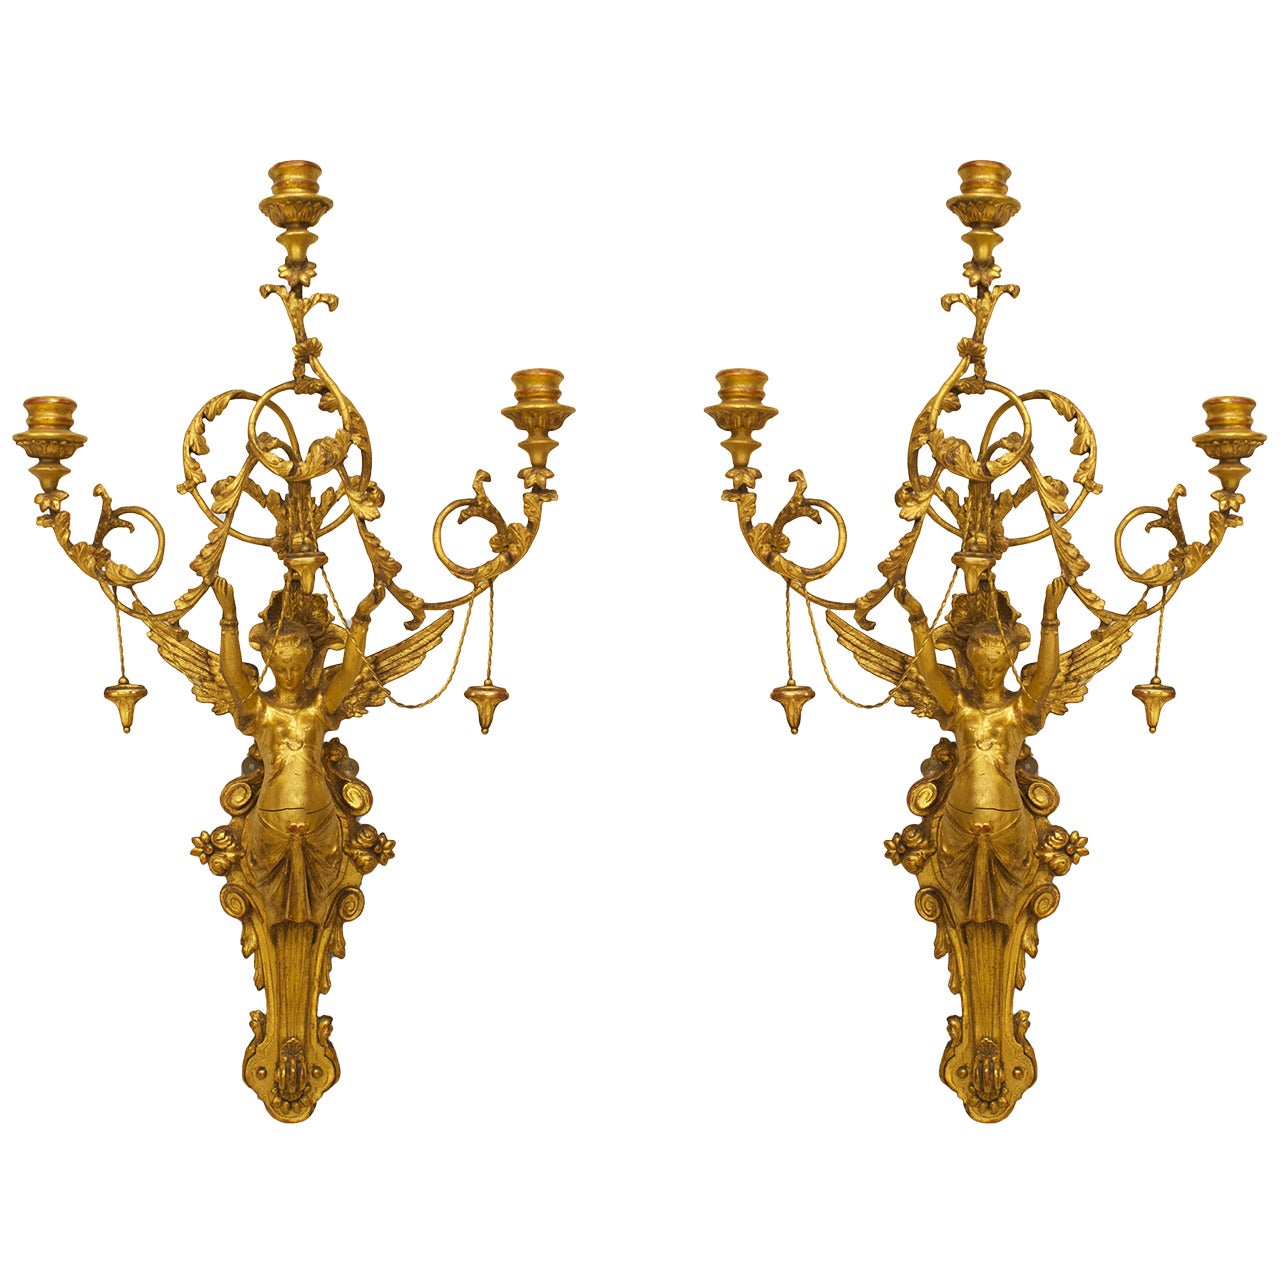 Pair of Italian Neoclassic Empire Gilt Wood Wall Sconces